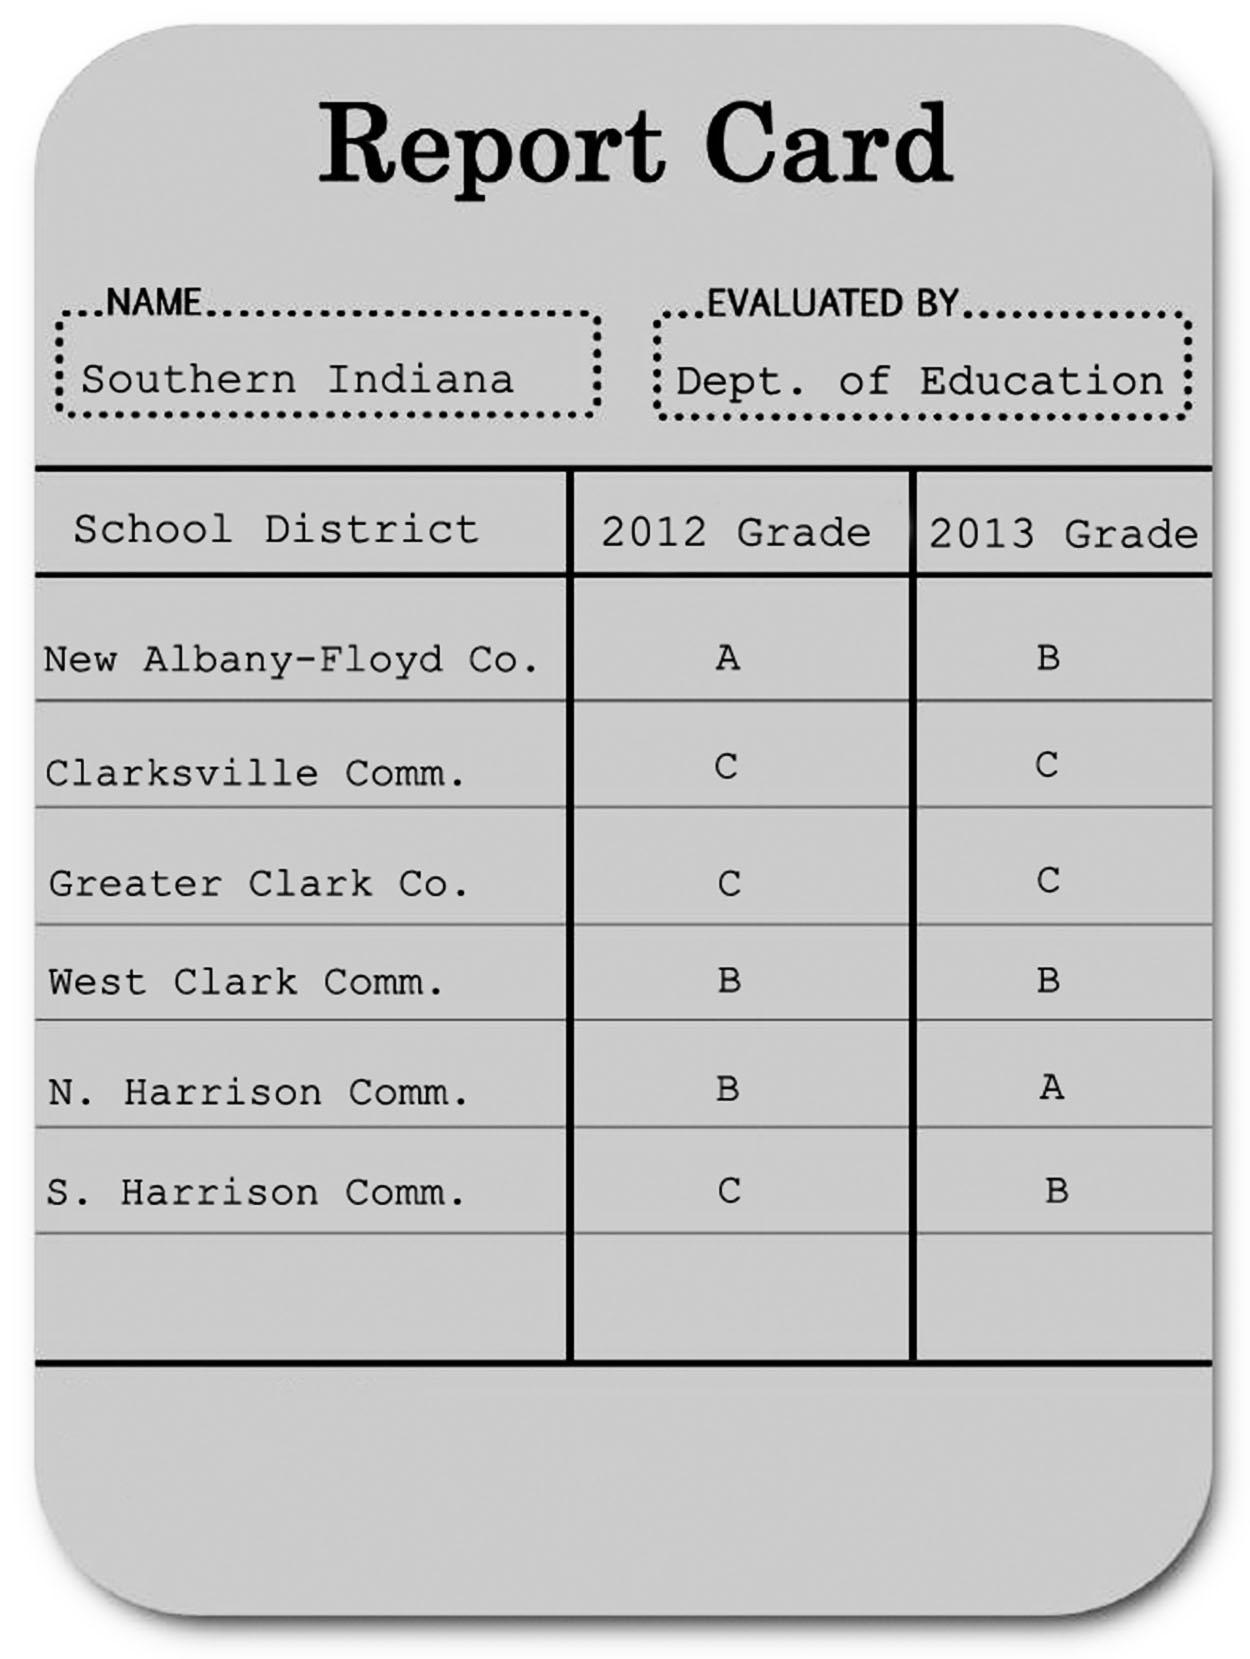 What Do Student Report Card Grades Measure?